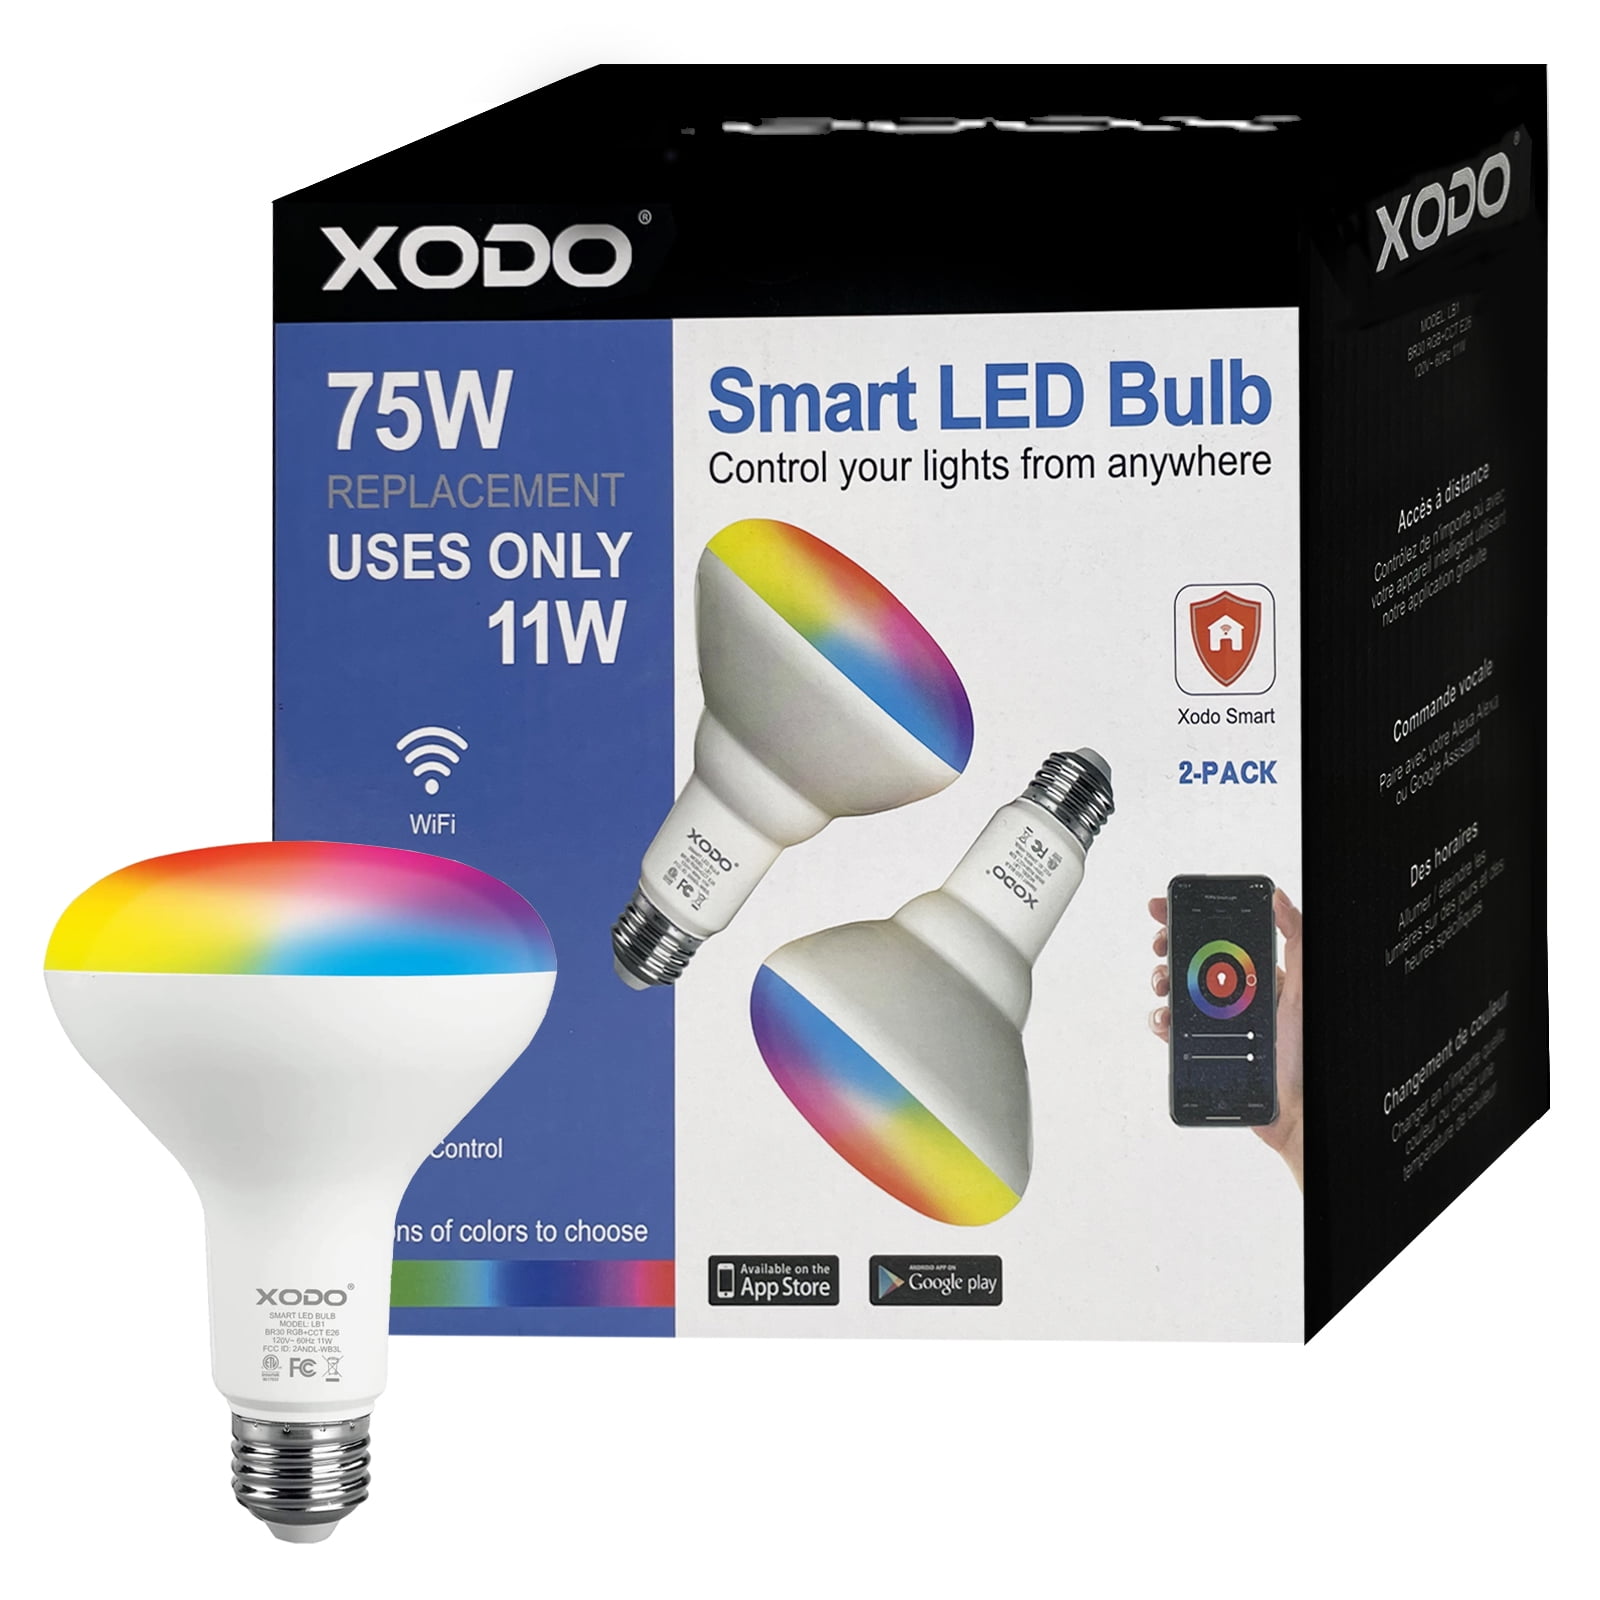 XODO Smart LED Flood Light Bulbs 4 Pack - WiFi, Dimmable, Color Changing,  BR30, E26, 11W (75W Equivalent), 900 Lumens